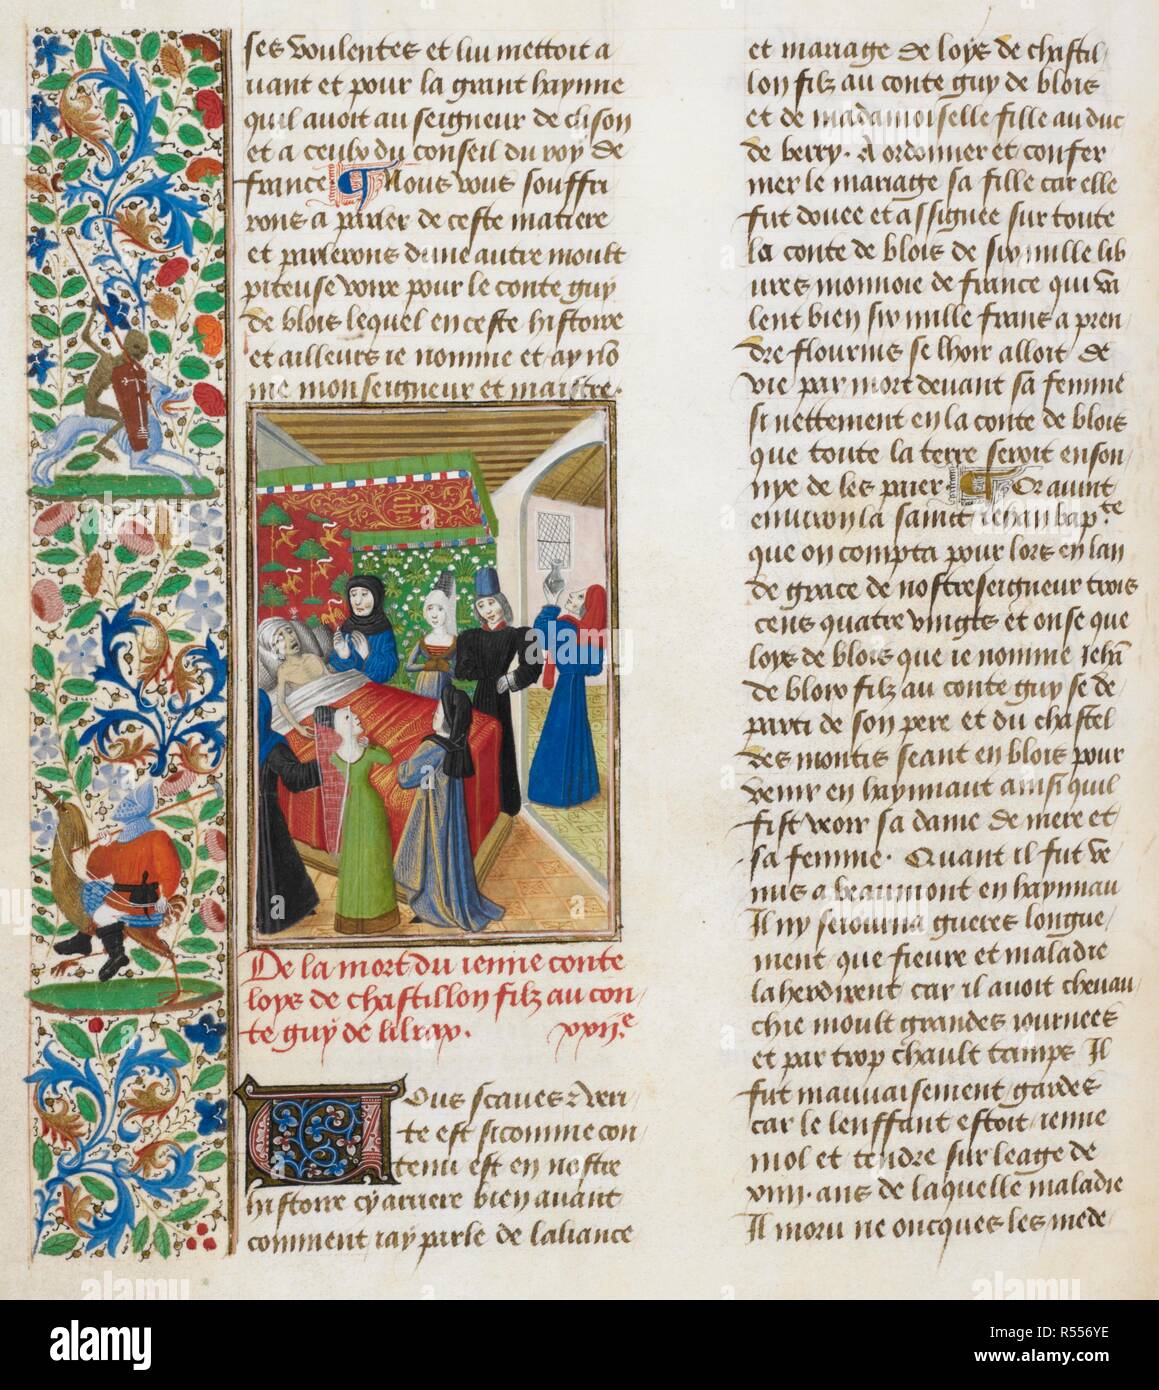 Charles VI meeting the duke of Brittany at Tours. Chroniques, Vol. IV, part 1 (the 'Harley Froissart'). (Froissart's Chronicles). Netherlands, S. (Bruges), between c. 1470 and 1472. Source: Harley 4379 f.125v. Language: French. Author: FROISSART, JEAN. Stock Photo